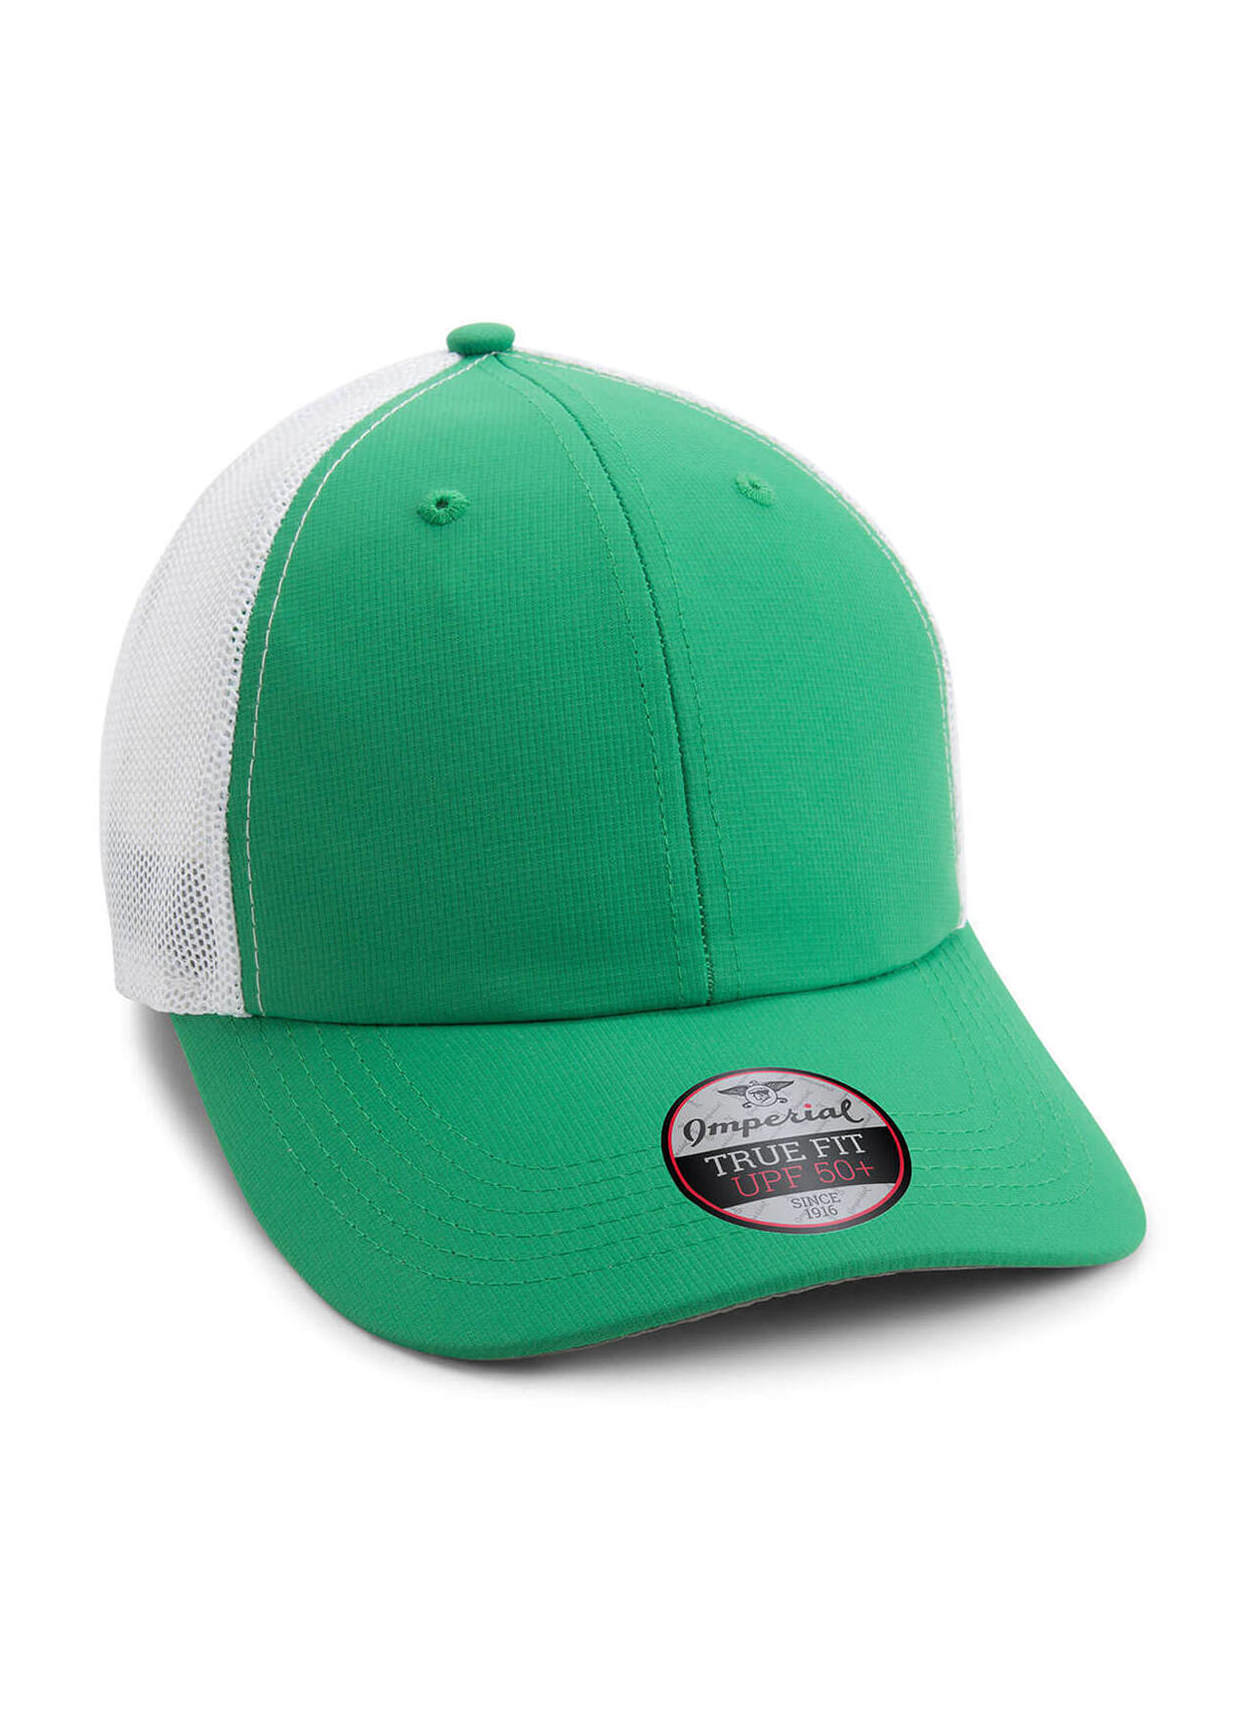 Imperial Grass / White Structured Performance Meshback Hat